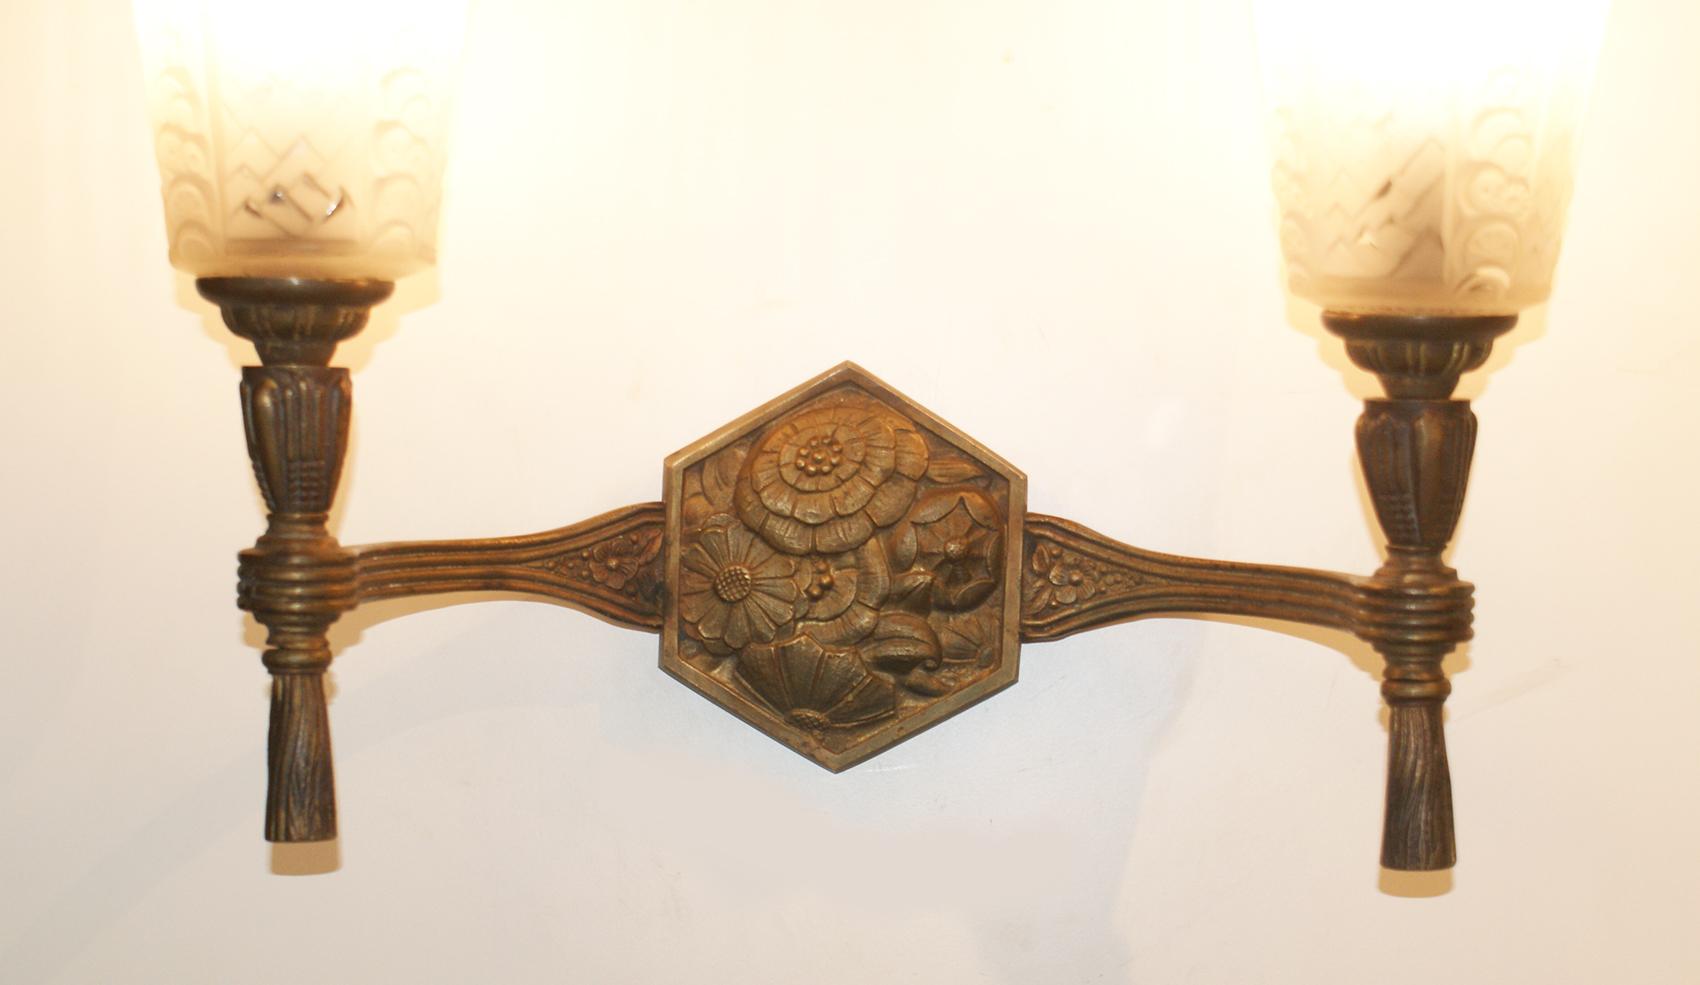 Stunning pair of French Art Deco wall lights consists of patinated bronze structure with beautiful floral motif design in the central of the sconces and two arms of lights supporting two tulips in molded clear frosted glass, signed Muller freres